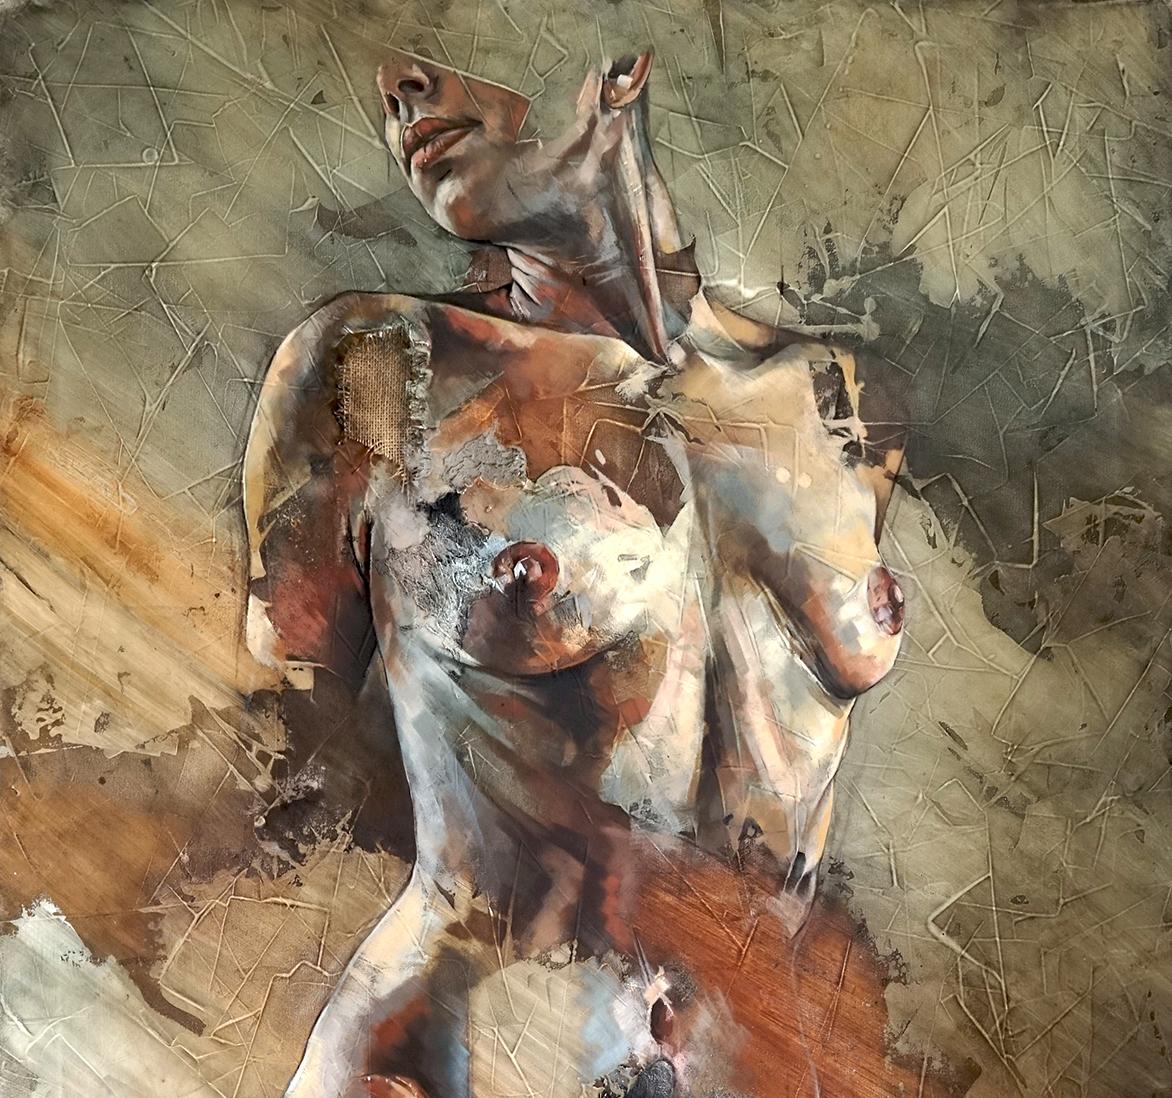 Ineffable by Francisco Jimenez - Contemporary  Abstract Figurative painting - Brown Nude Painting by Francisco Jose Jimenez